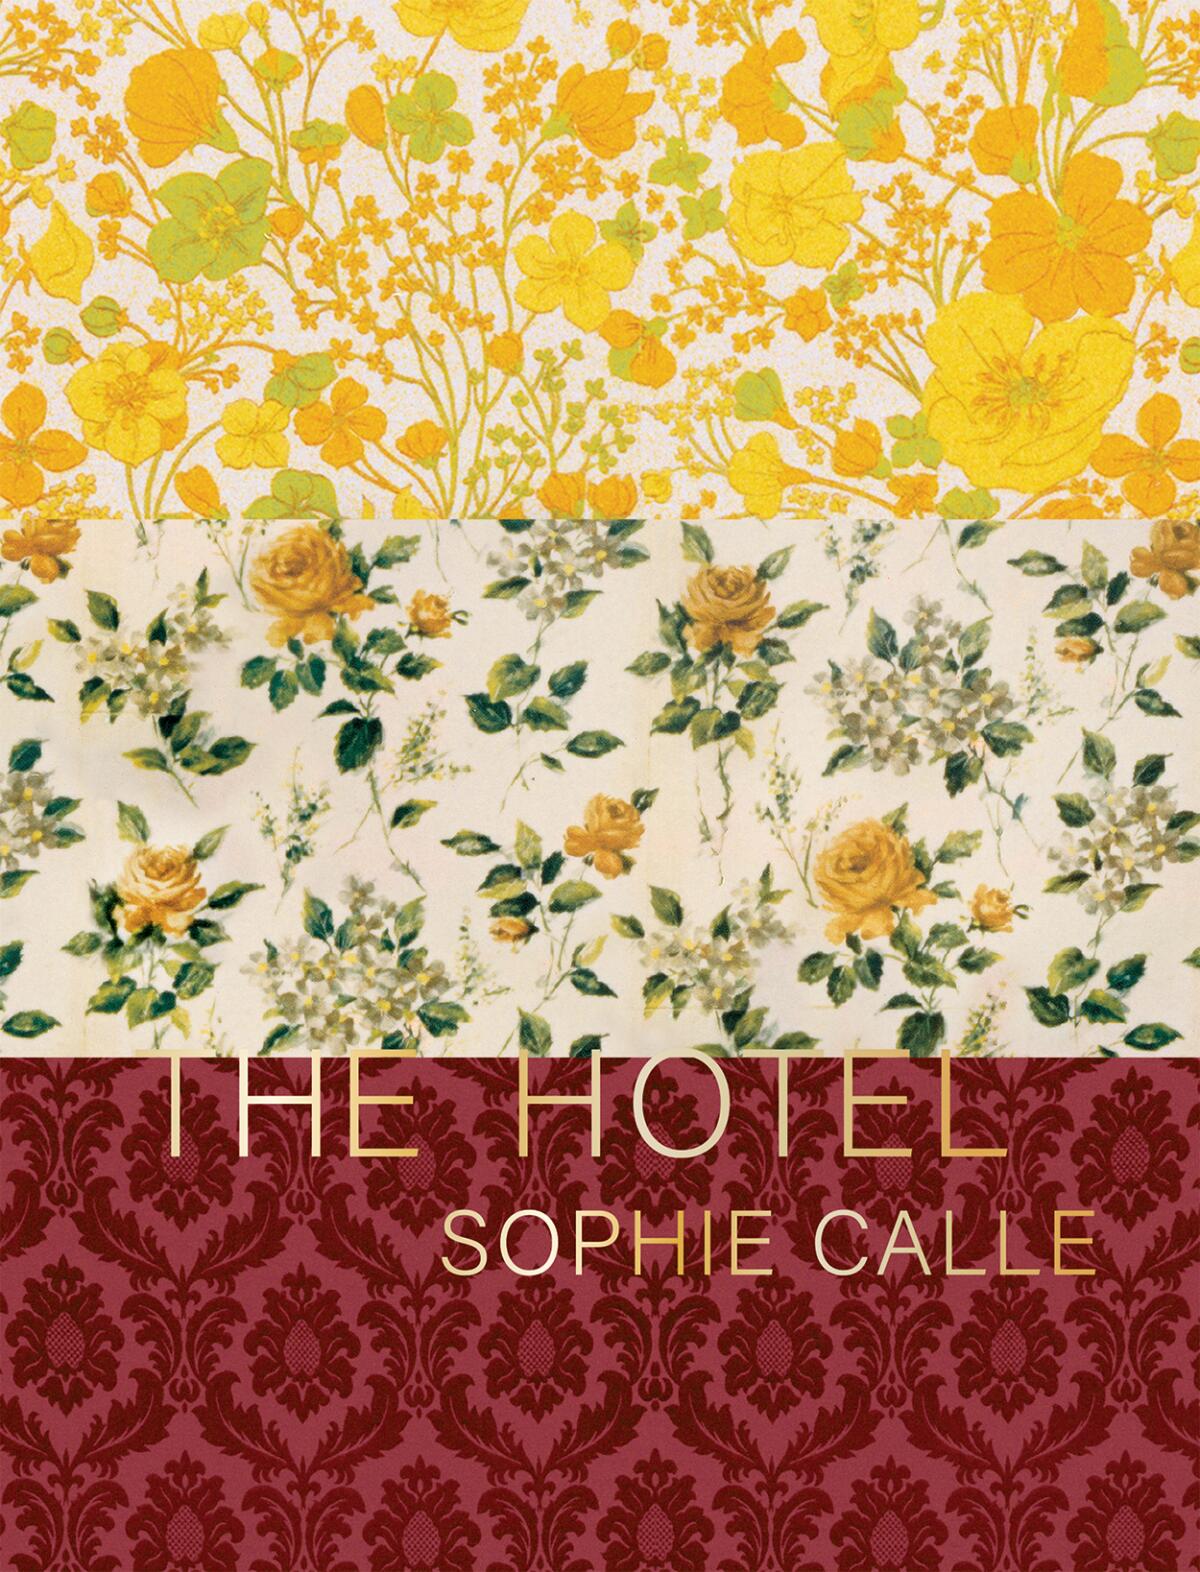 The cover of Sophie Calle's book The Hotel shows three strips of wallpaper, two floral and one red flocked.